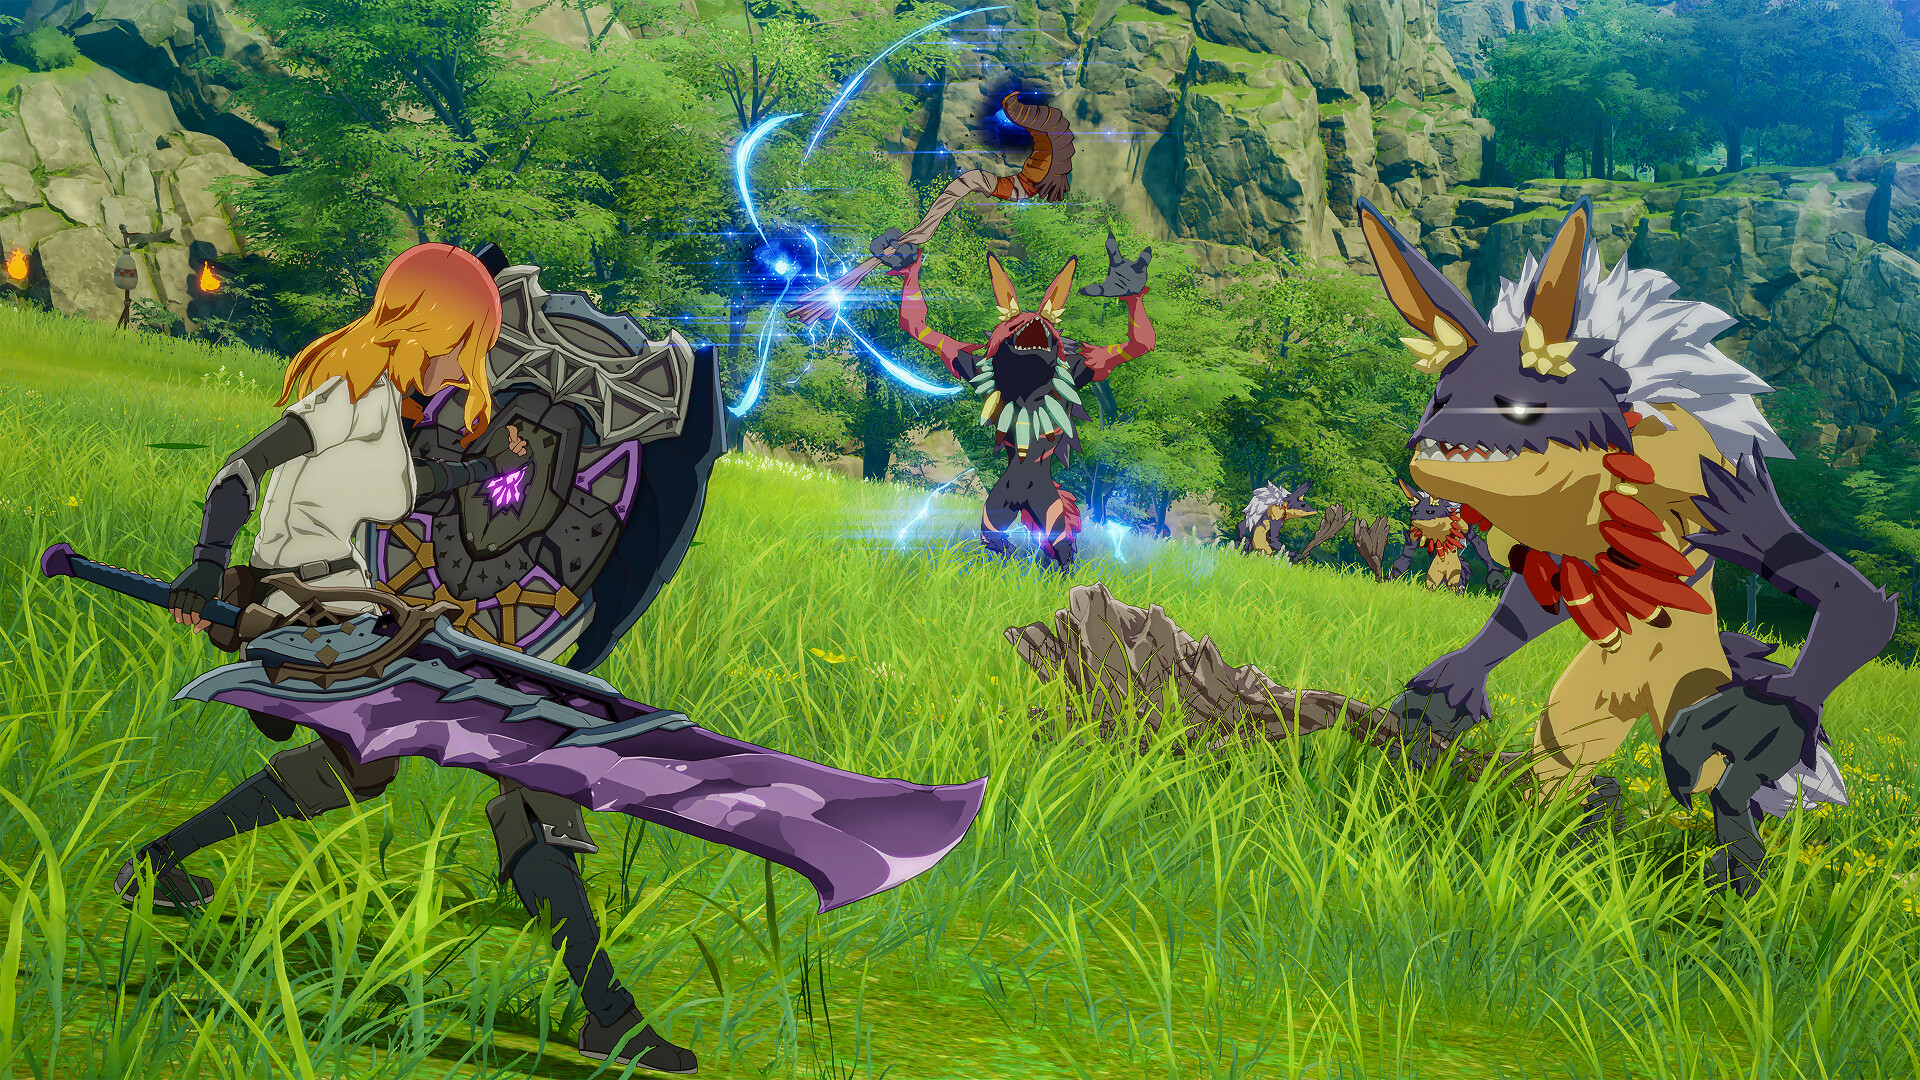 Blue Protocol: A New Frontier for Anime MMO RPGs – Mytrix Direct